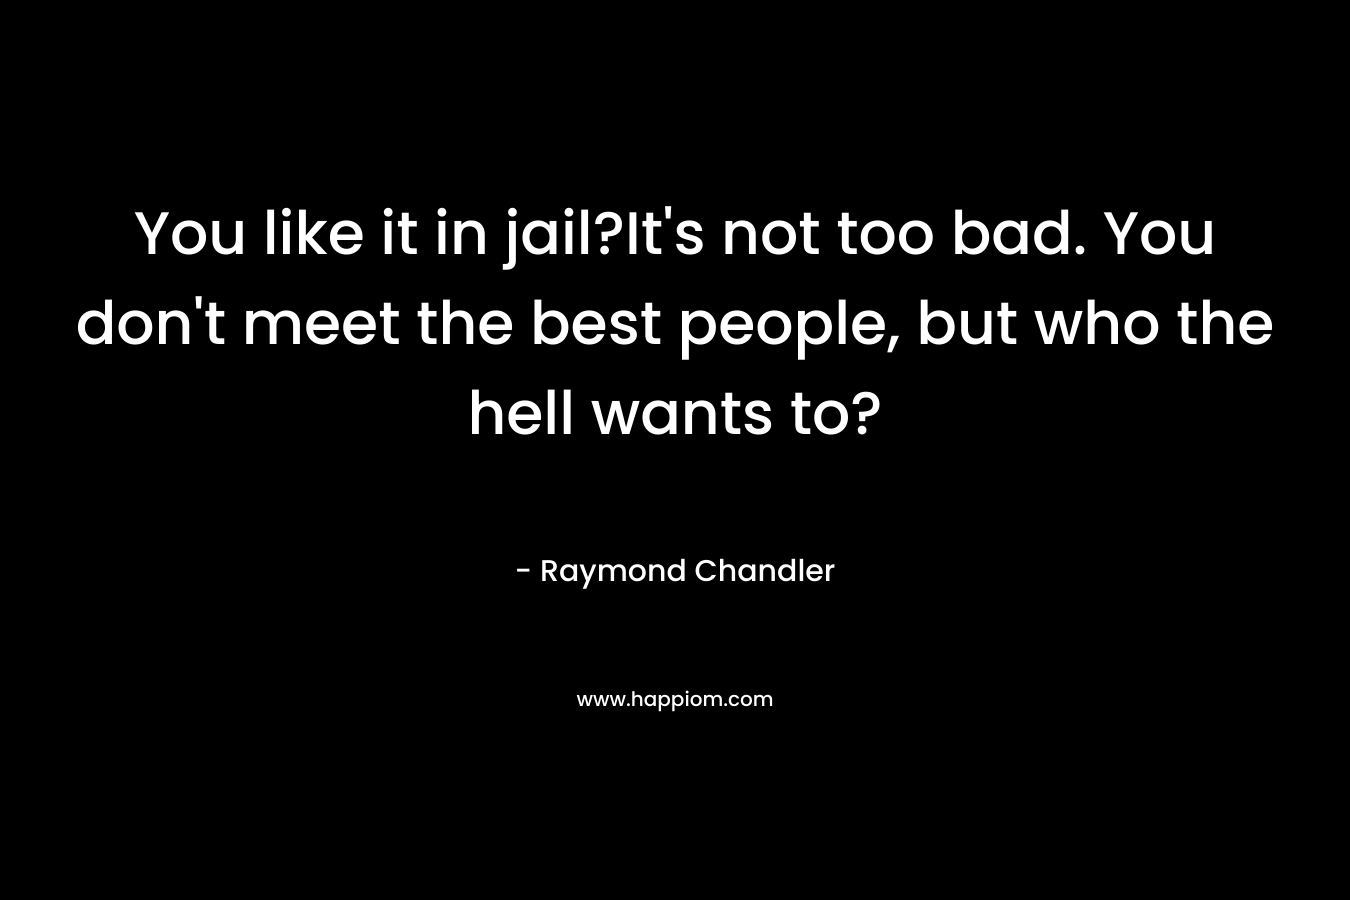 You like it in jail?It's not too bad. You don't meet the best people, but who the hell wants to?